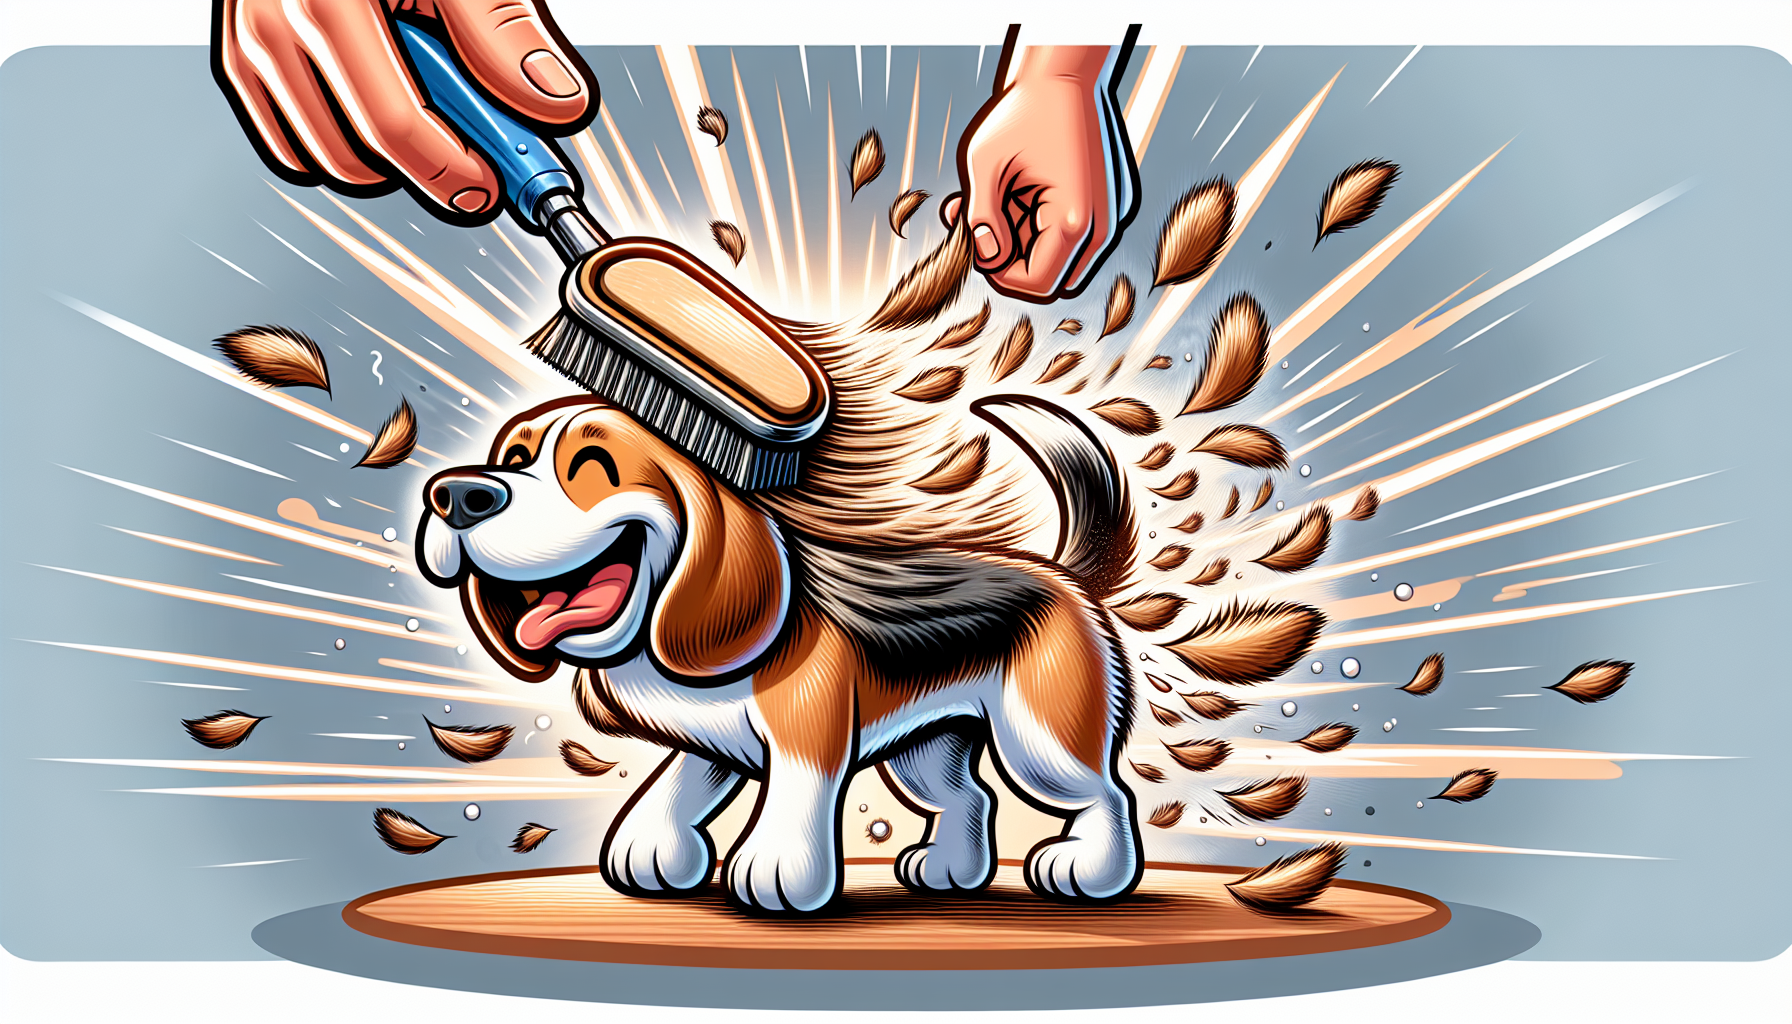 Beagle being groomed